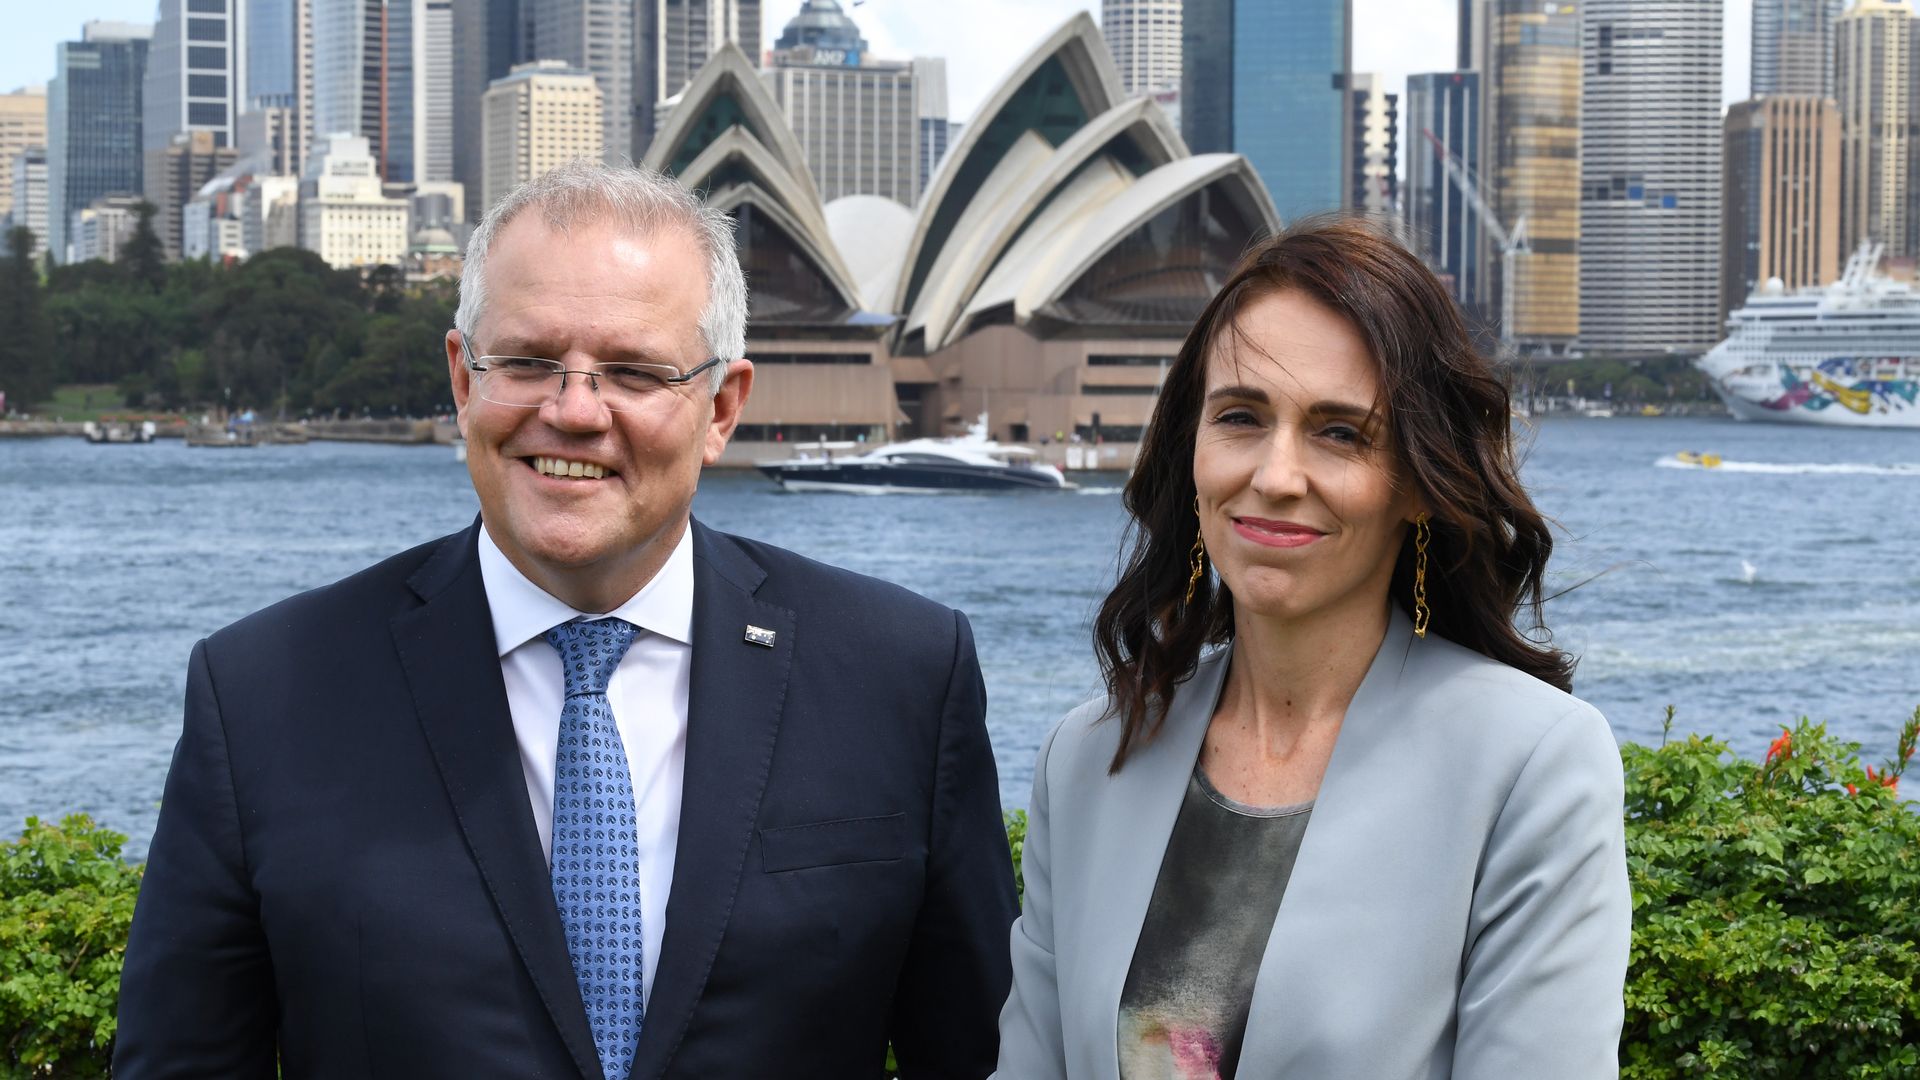  New Zealand Prime Minister, Jacinda Ardern and Australian Prime Minster, Scott Morrison pose for a photo before a press conference held at Admiralty House on February 28, 2020 in Sydney, Australia. 